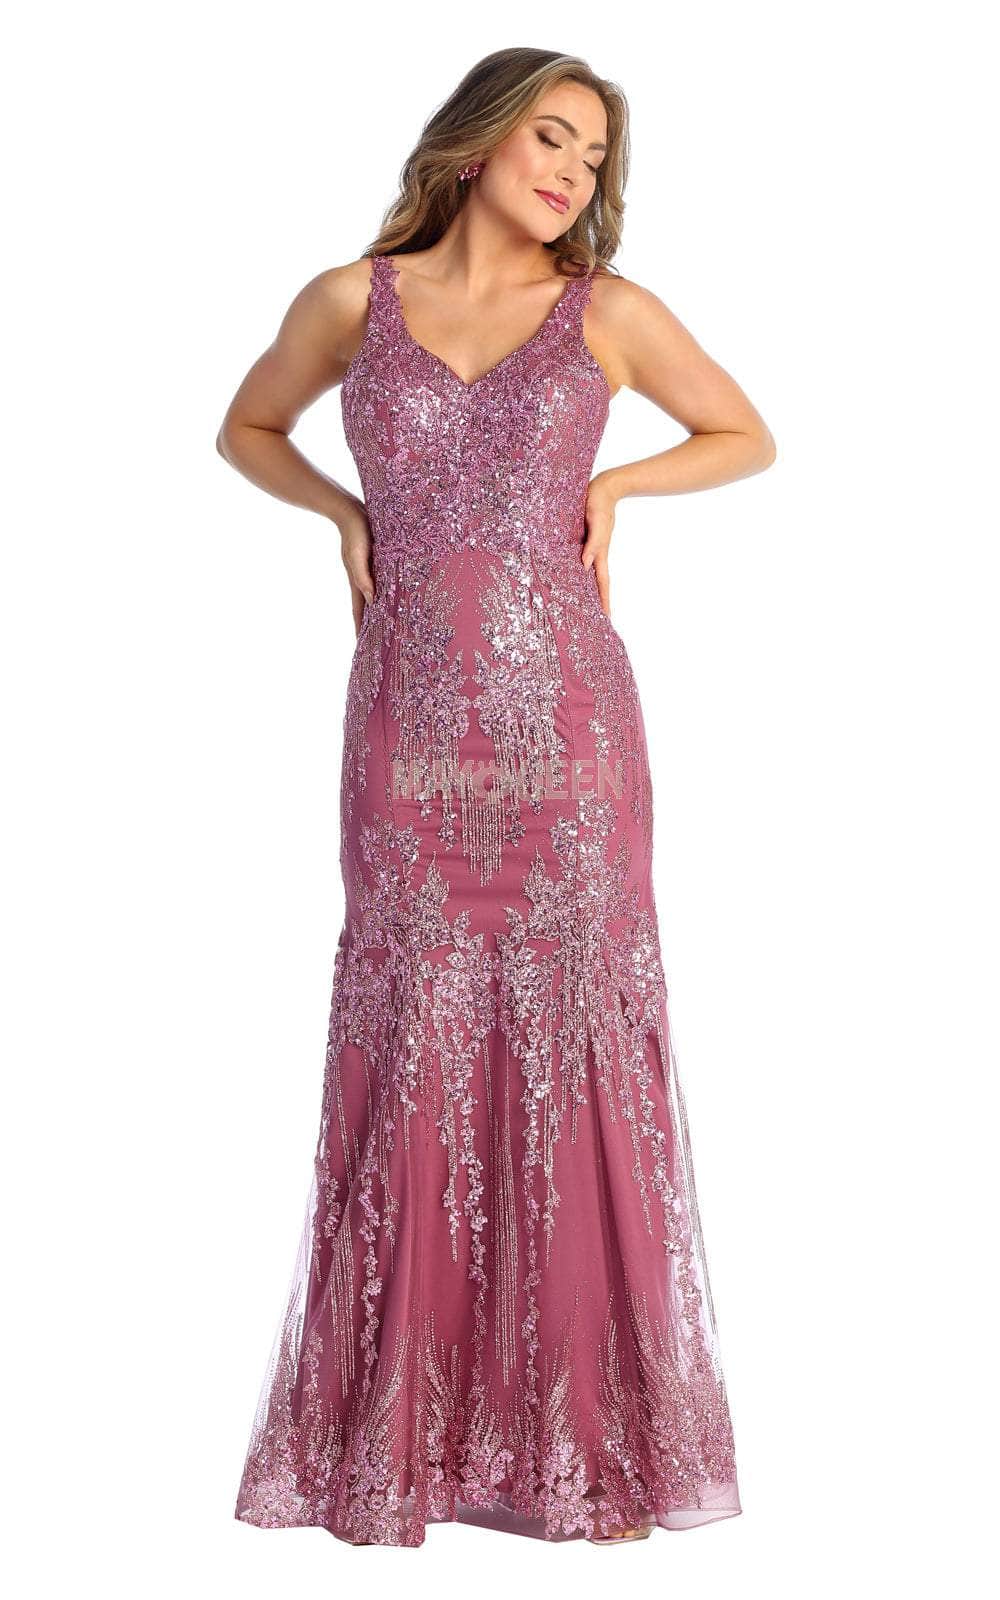 May Queen RQ7941 - Sequined Cut-out Evening Dress Special Occasion Dress